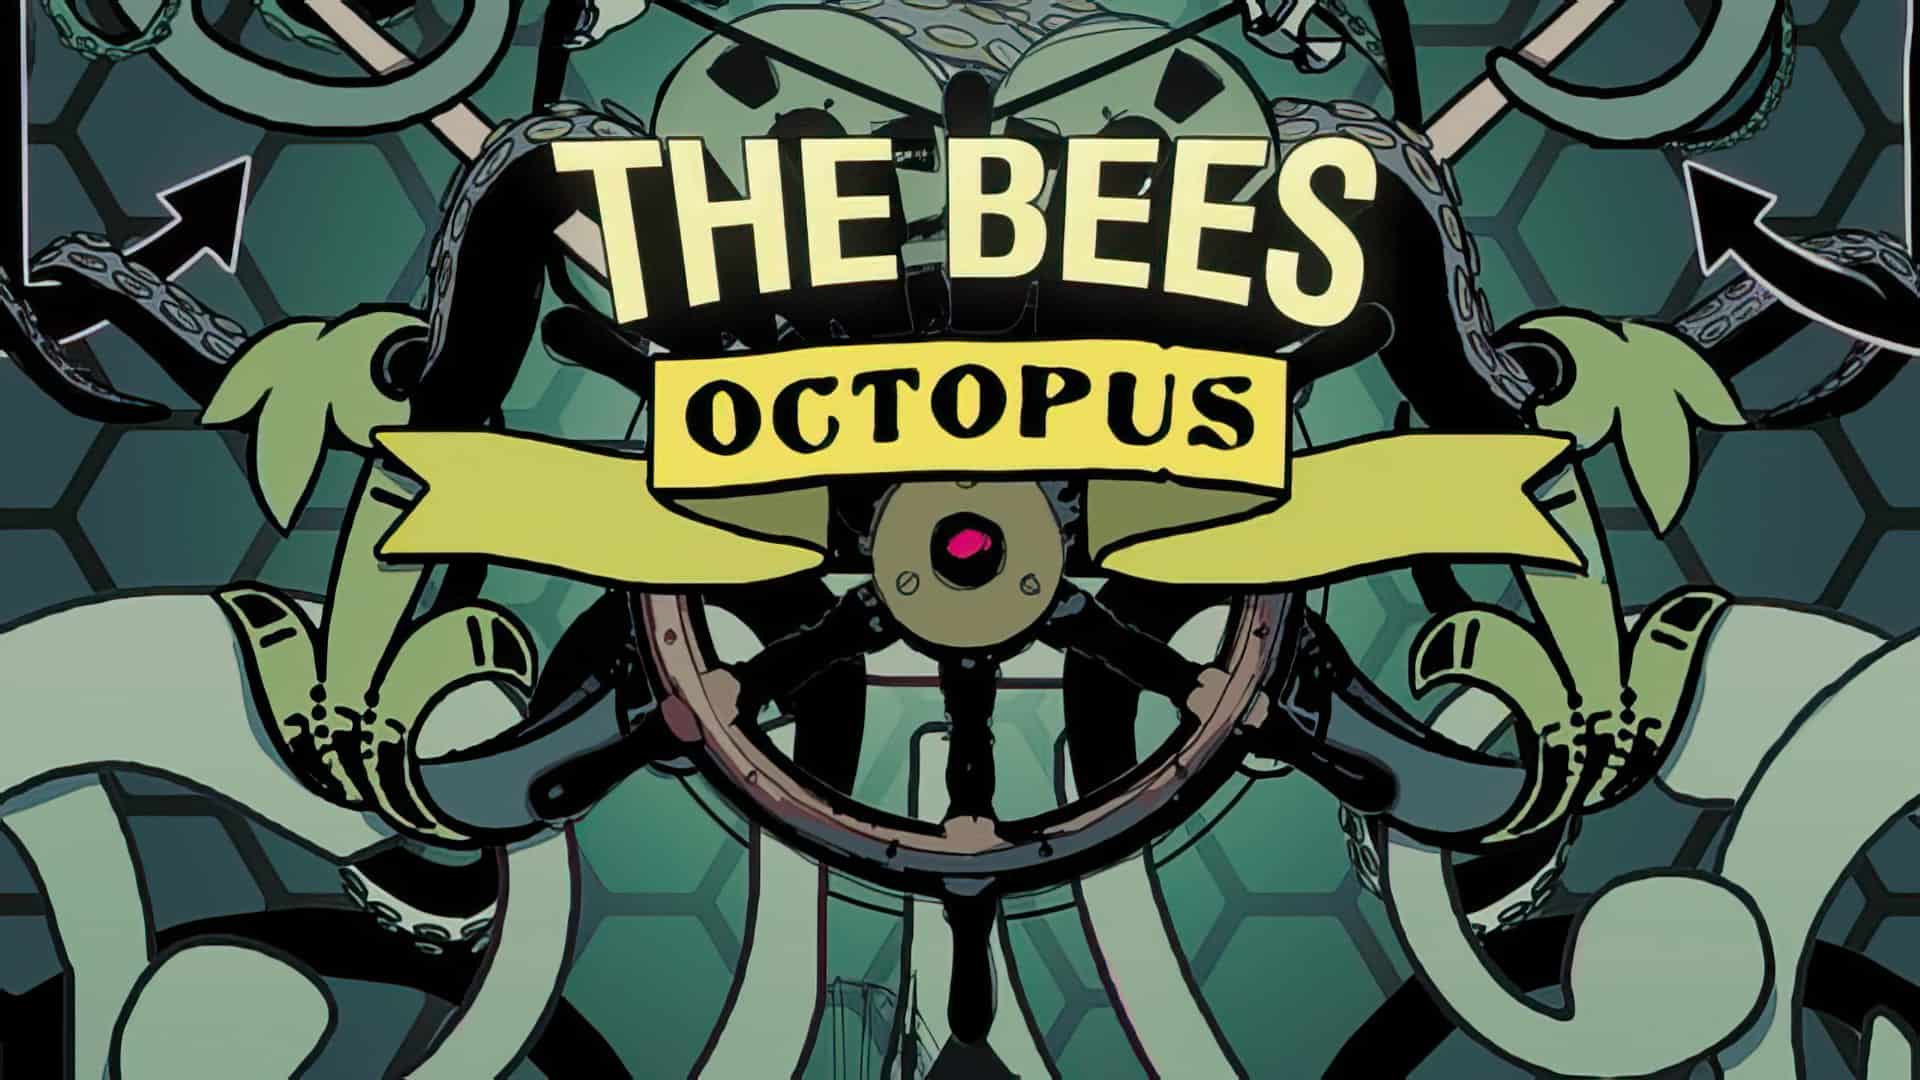 The Bees - Octopus cover slice